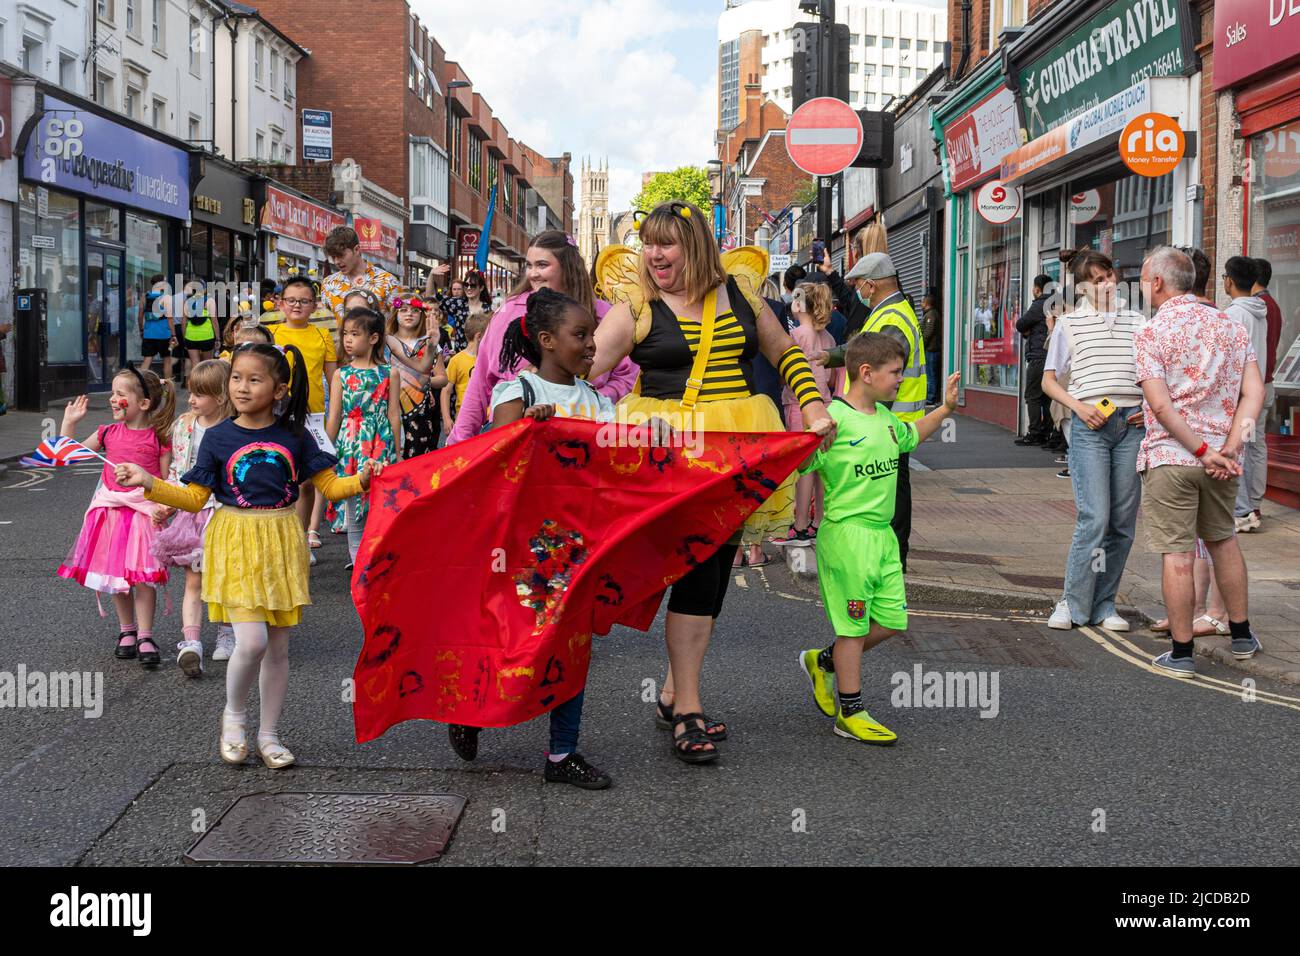 The Grand Parade at Victoria Day, an annual event in Aldershot, Hampshire, England, UK. Children in costumes with flowers and bees theme. Stock Photo